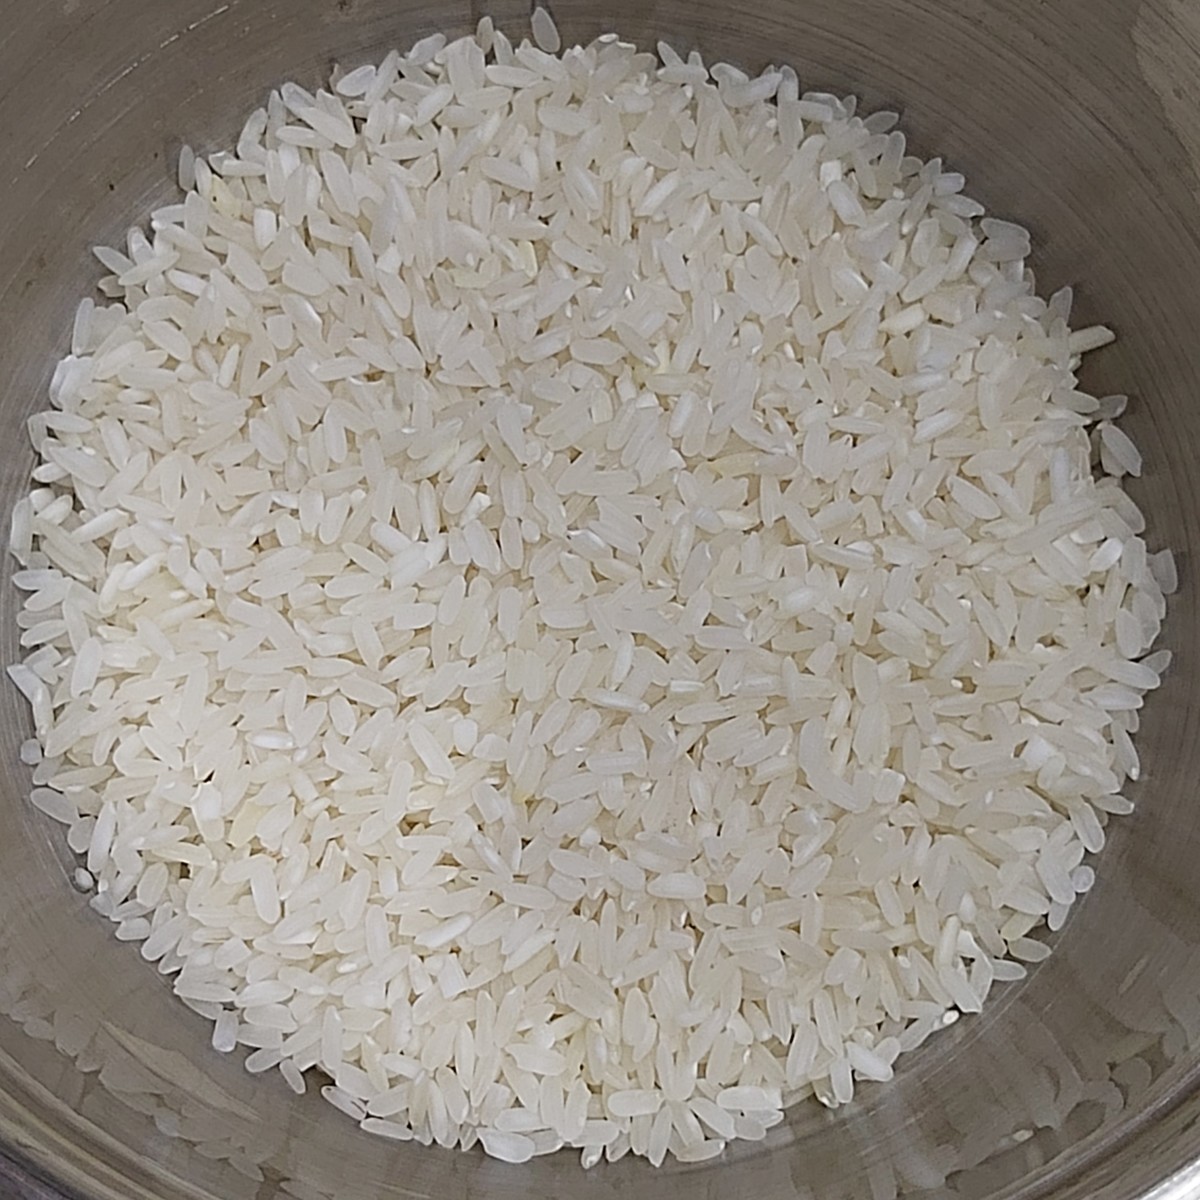 In a bowl or vessel, add 1 cup of dosa rice (or any type of rice).